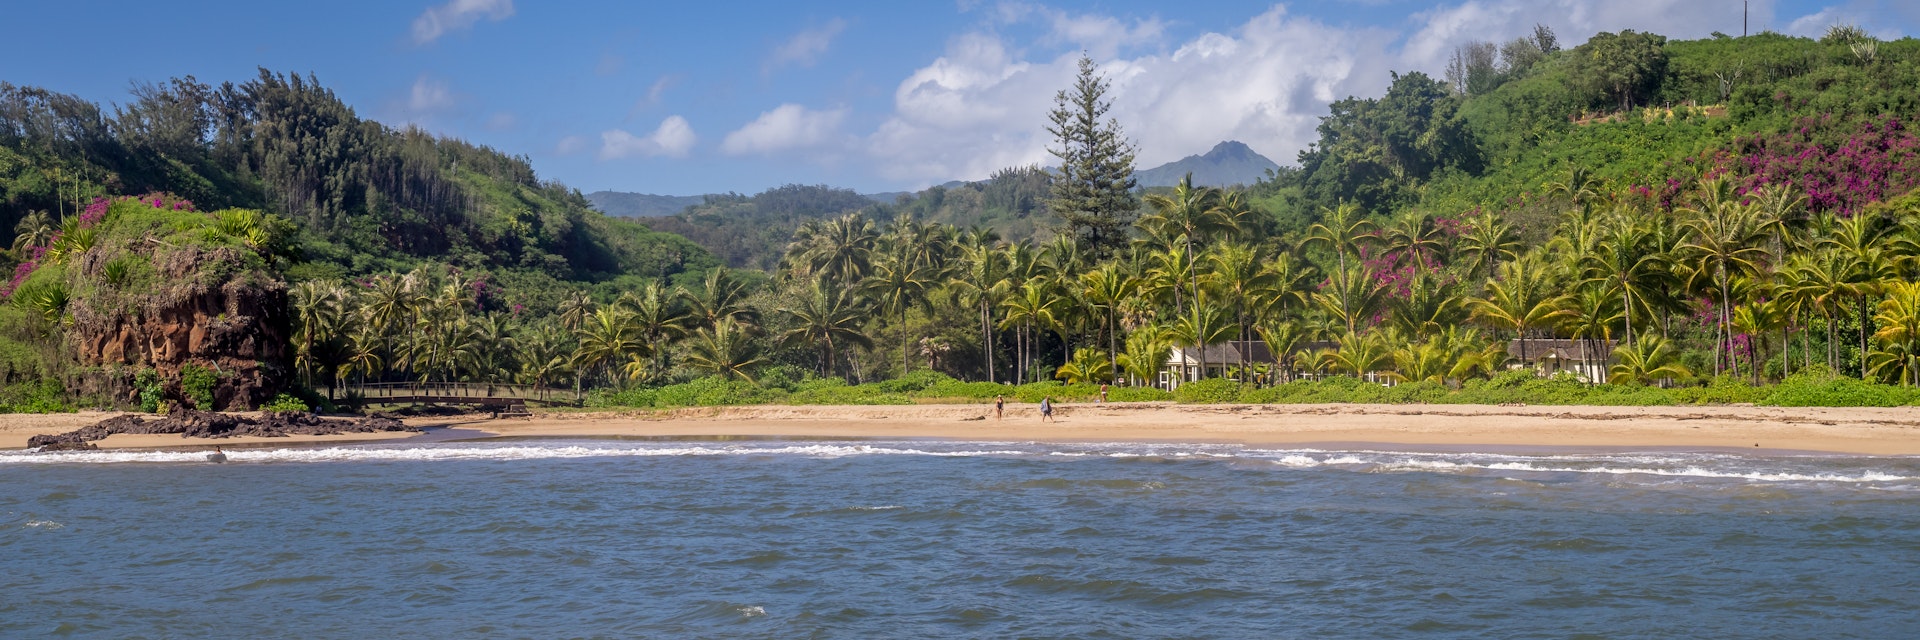 Panoramic view of McBryde Gardens on Kauai. This was the former summer home of the queen of Hawaii. ; Shutterstock ID 603442910; purchase_order: 65050; job: ; client: ; other:
603442910